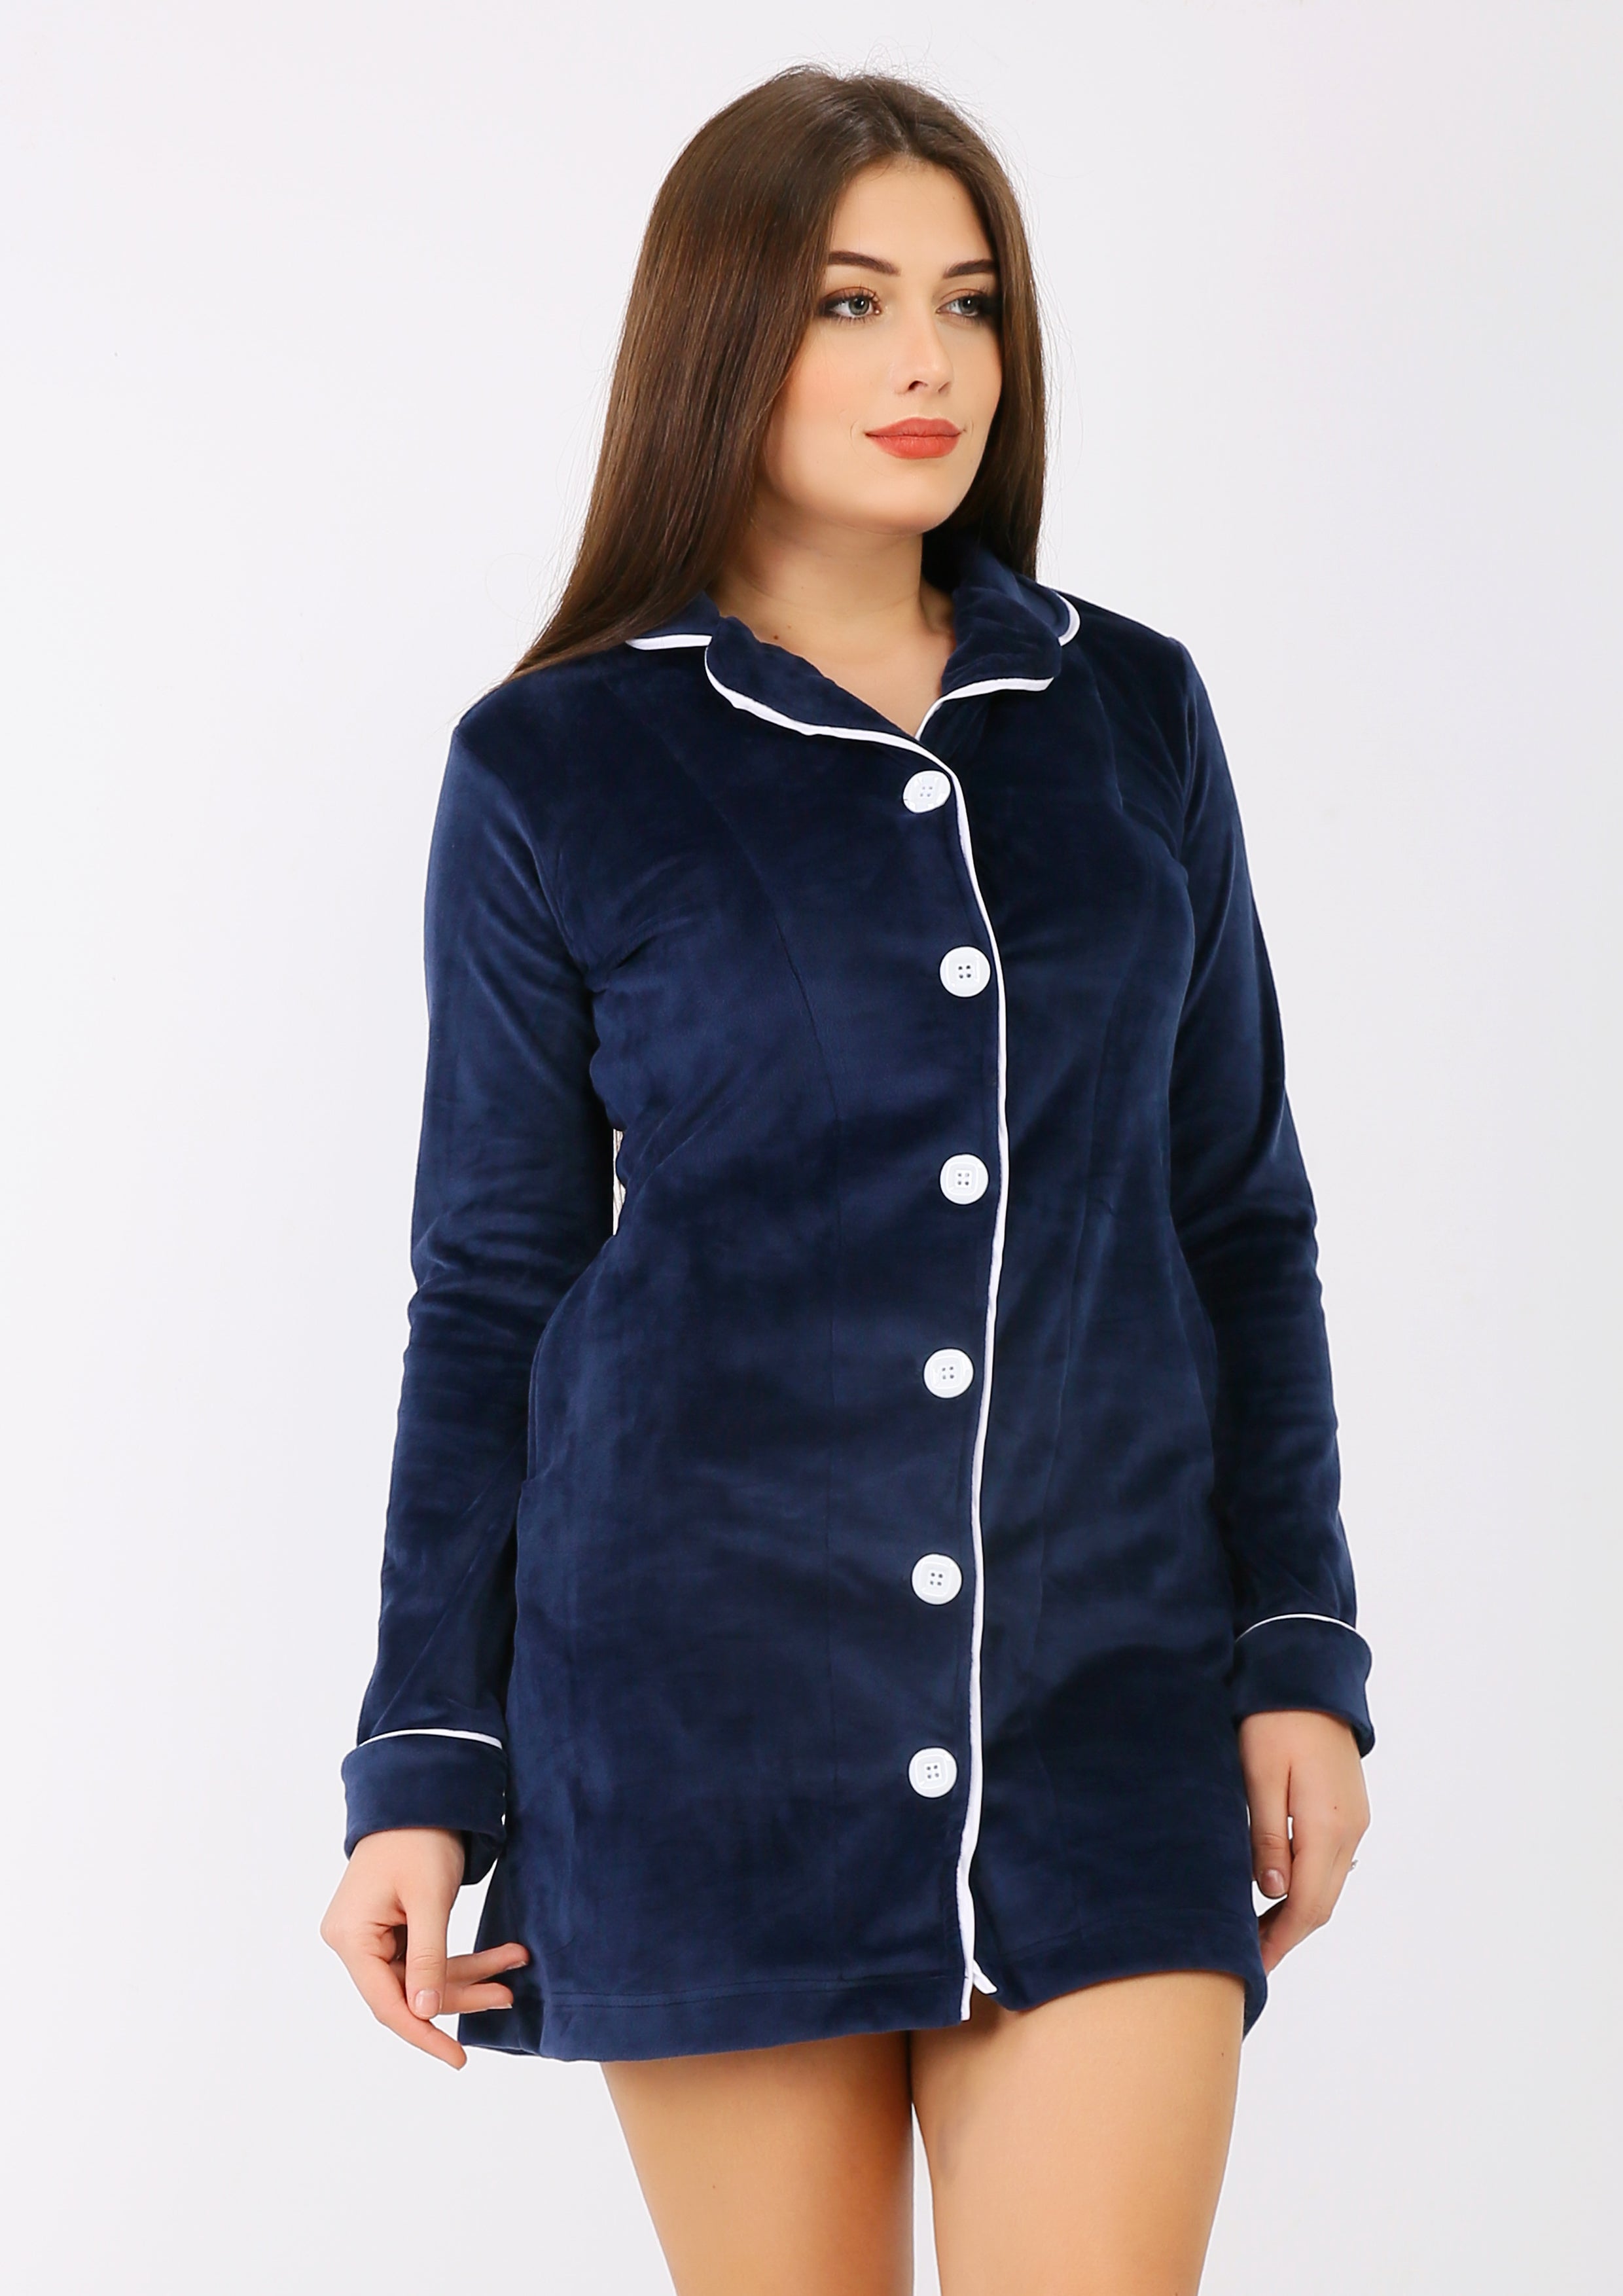 Short Navy Blue Heidi dress with lining on both sides and buttons